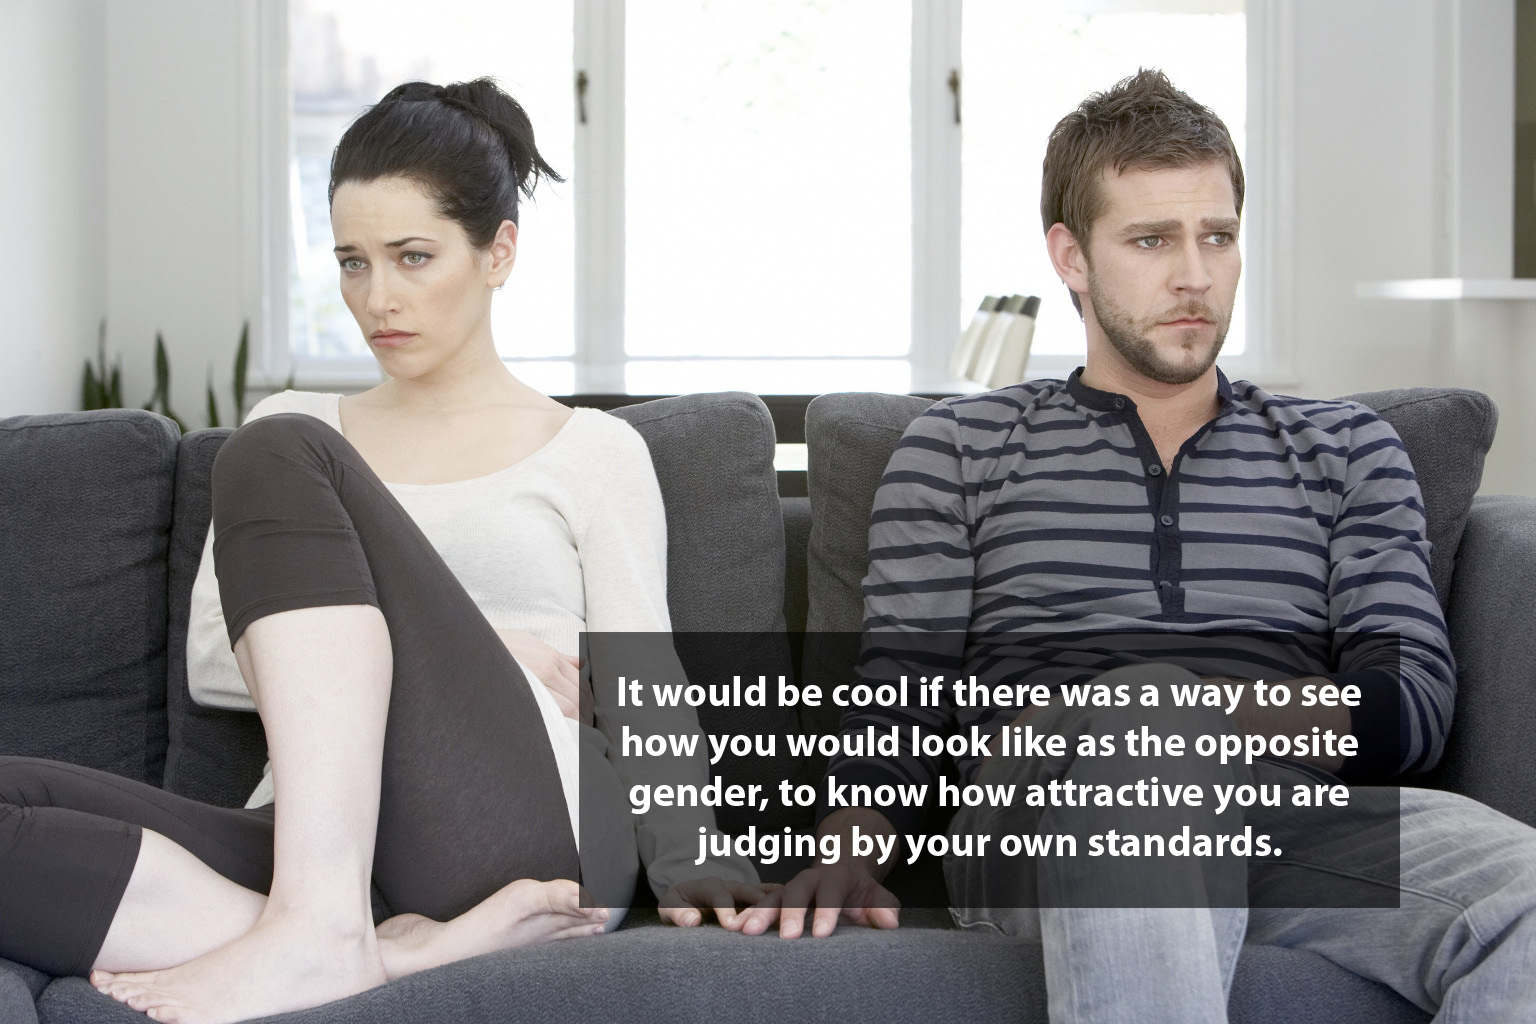 shower thought It would be cool if there was a way to see how you would look as the opposite gender, to know how attractive you are judging by your own standards.